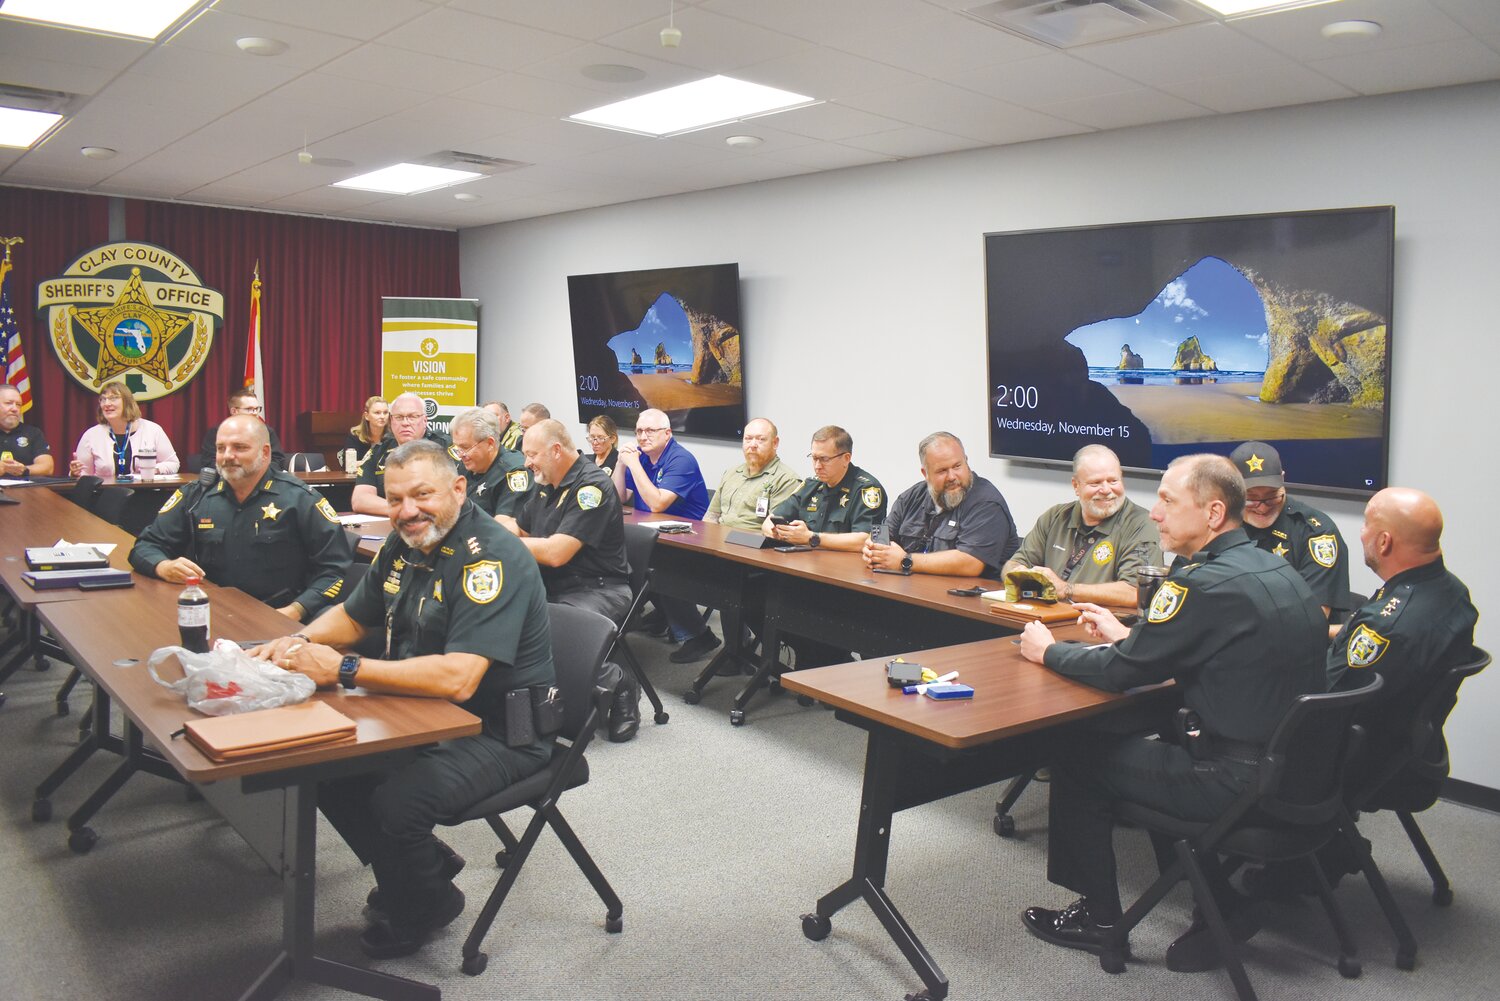 A planning board mapped out the number of deputies and police officers needed at every event and created a command post and the person in charge for each.